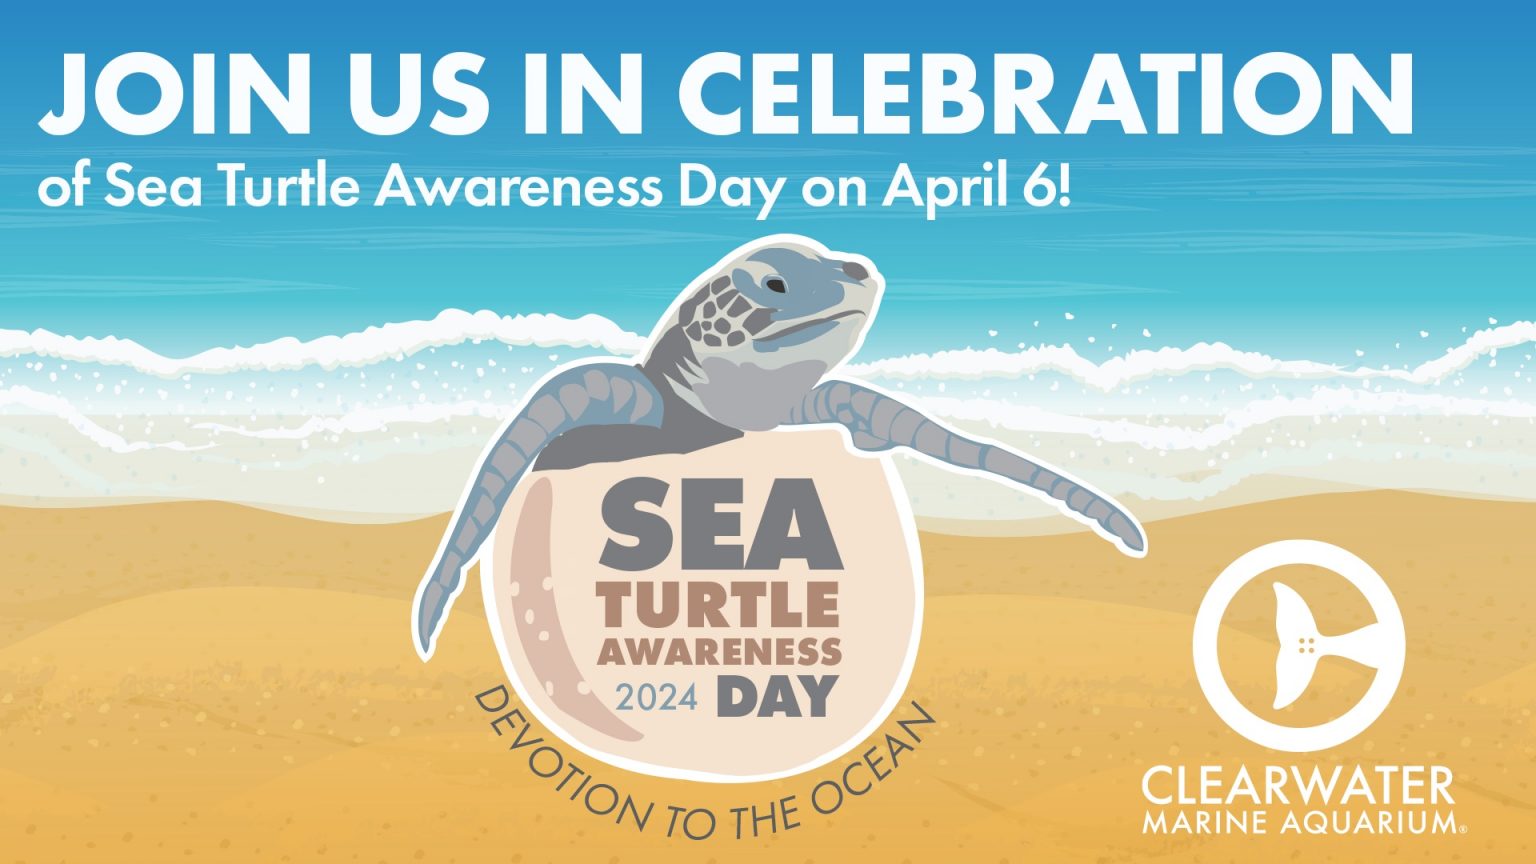 This graphic is for Sea Turtle Awareness Day.